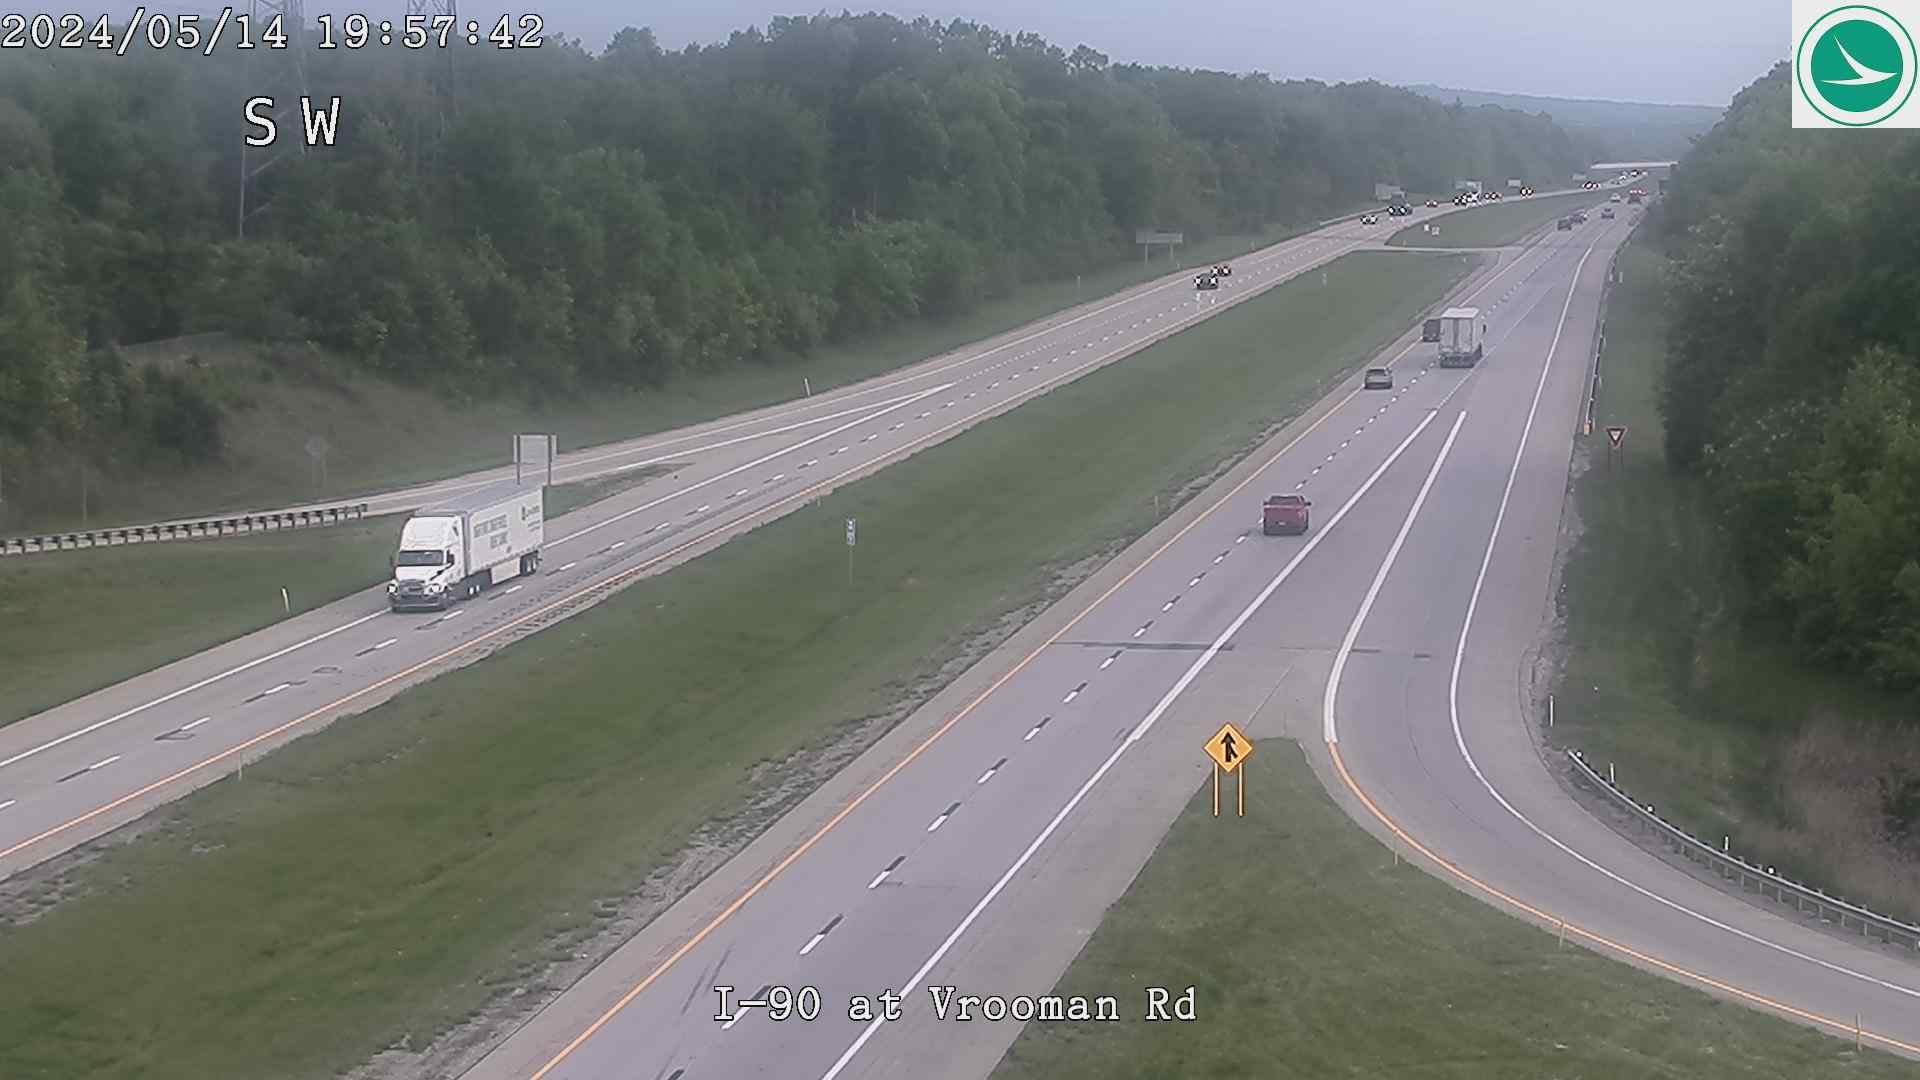 Five Points: I-90 at Vrooman Rd Traffic Camera